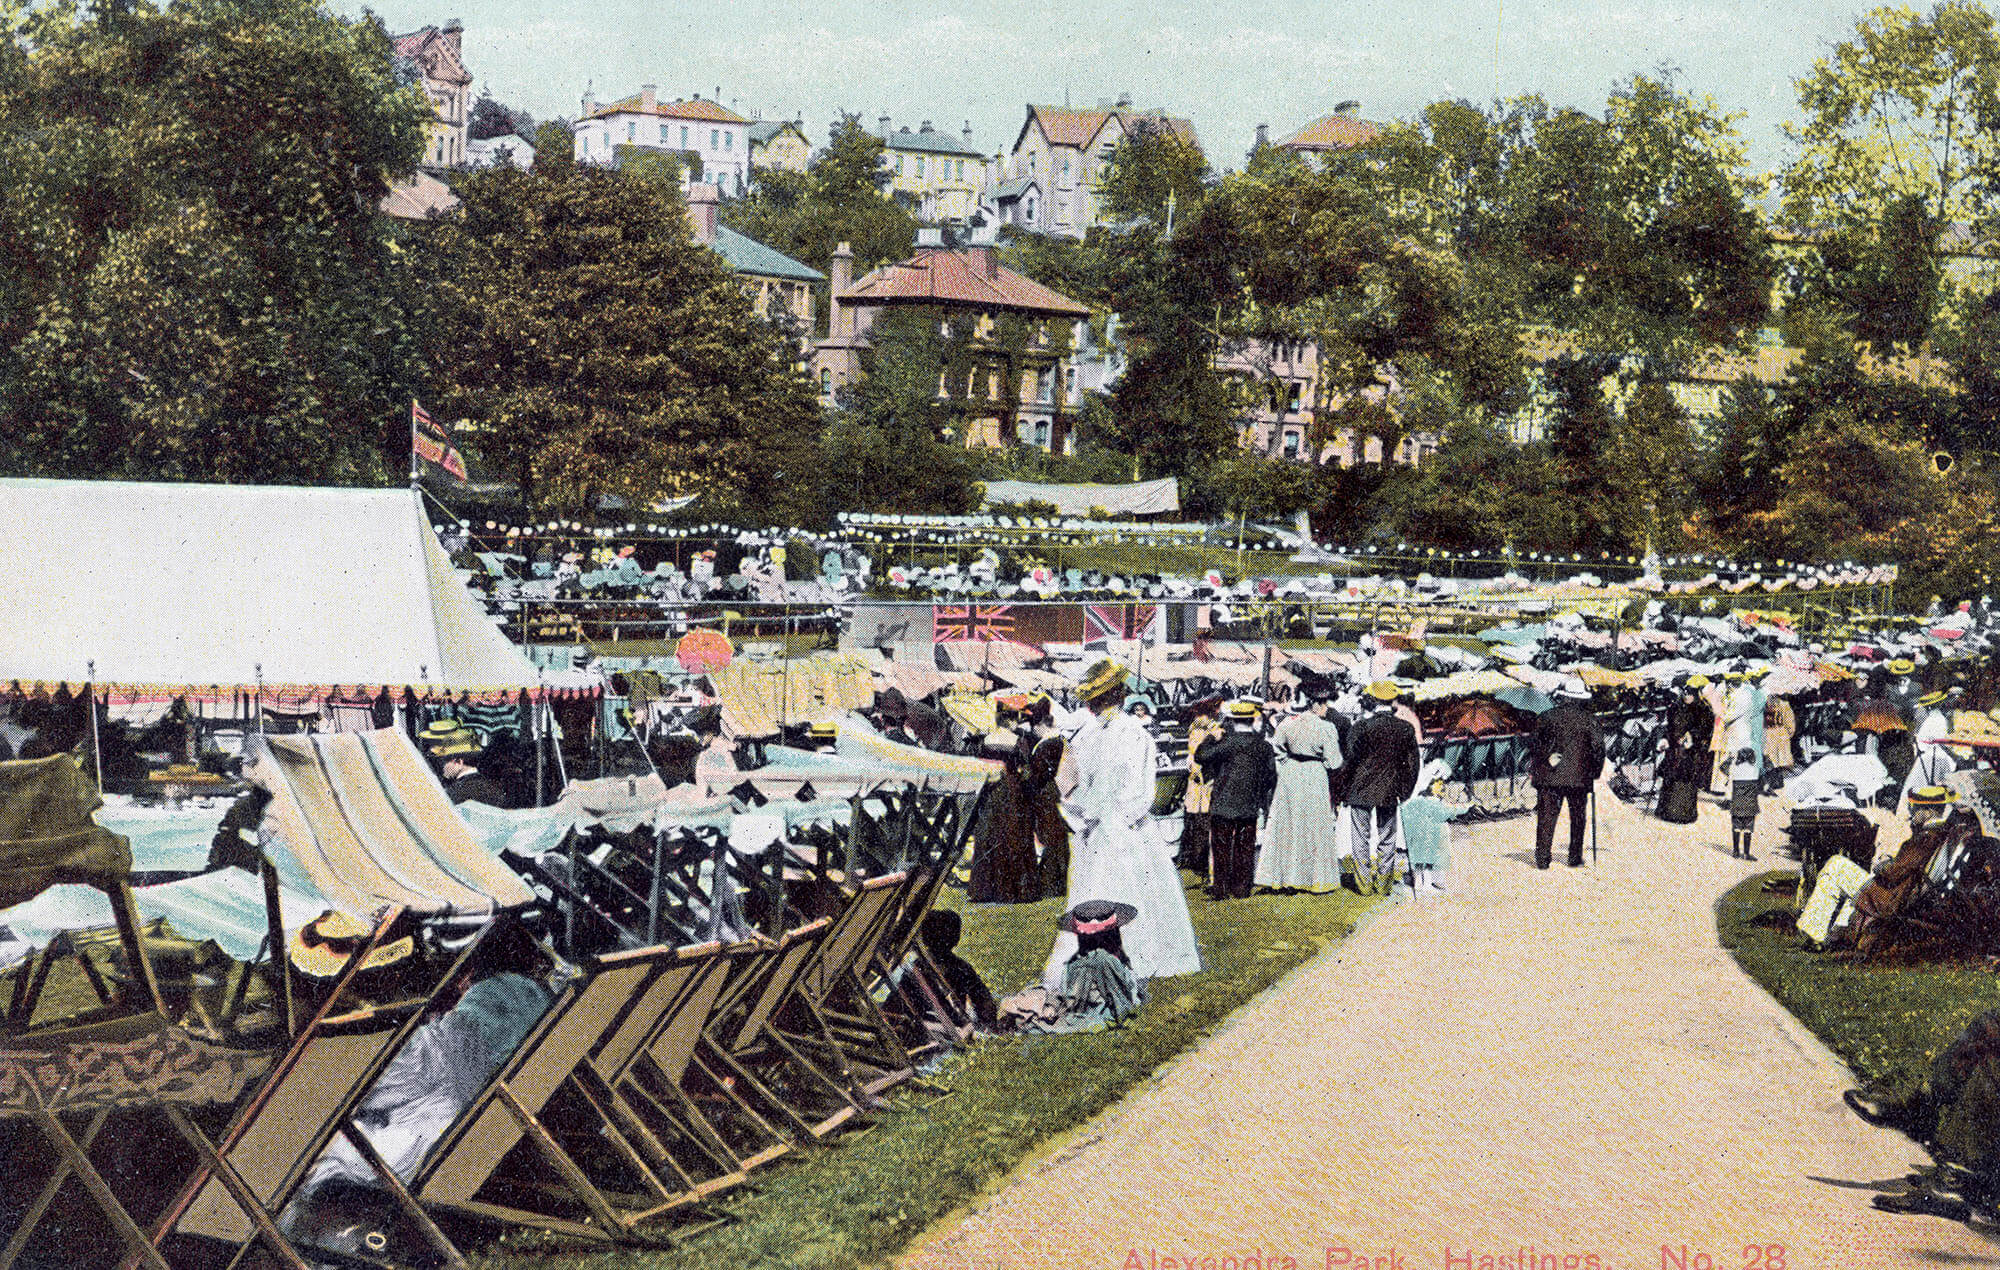 Victorian postcard of visitors sat in rows of deck chairs at Alexandra Park, with houses visible in the background through the trees